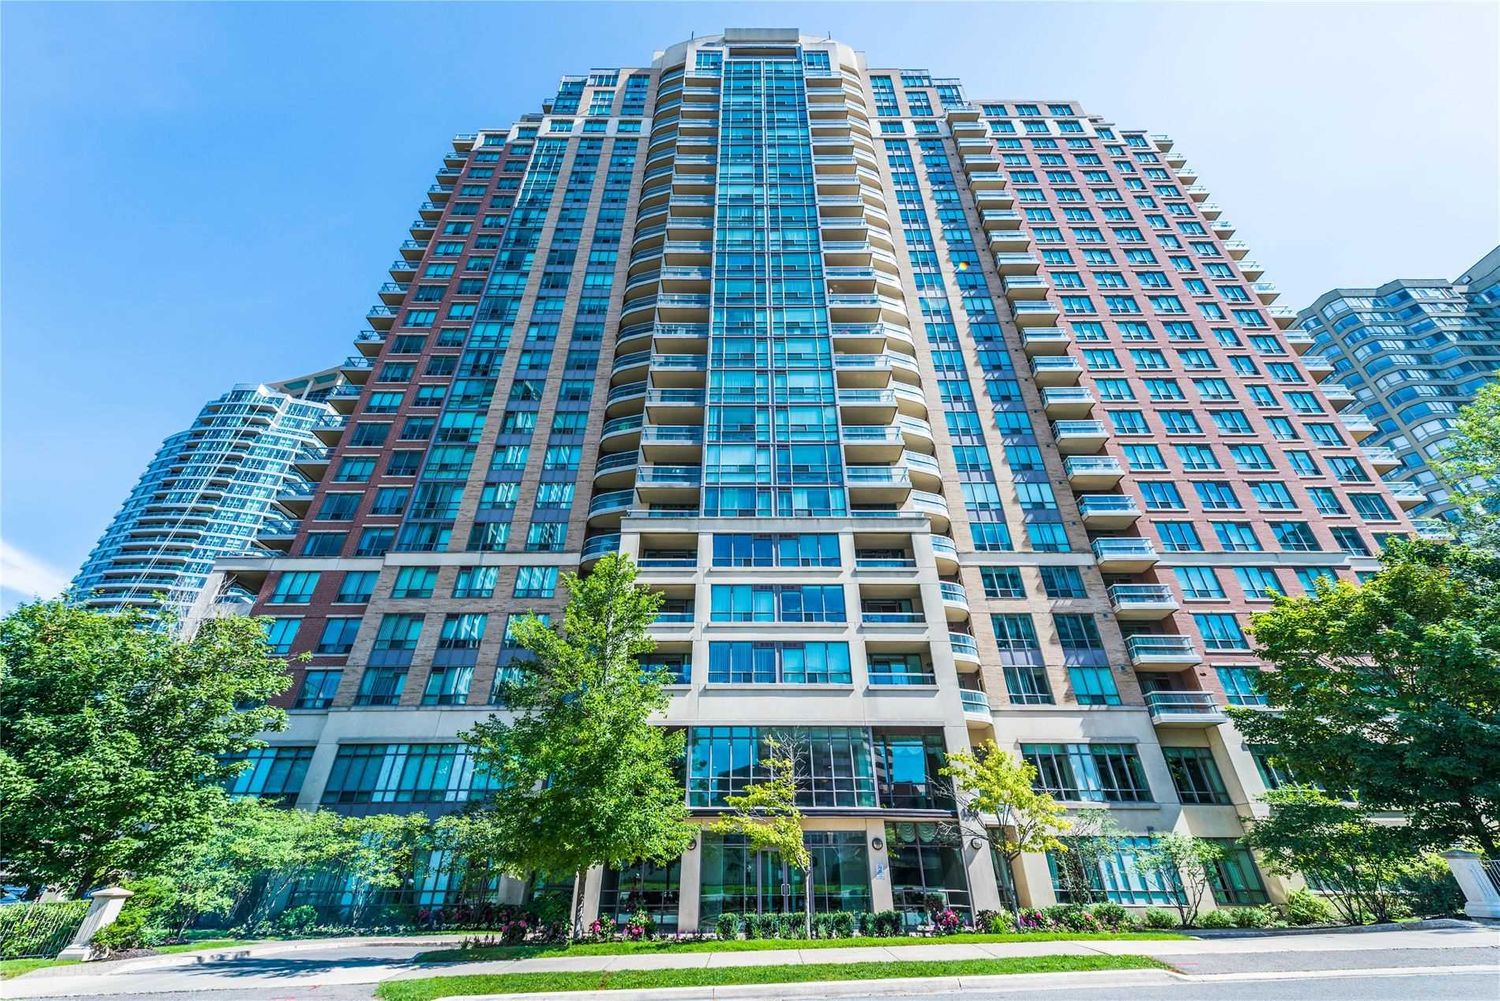 156 Enfield Place. Tiara Condos is located in  Mississauga, Toronto - image #2 of 3